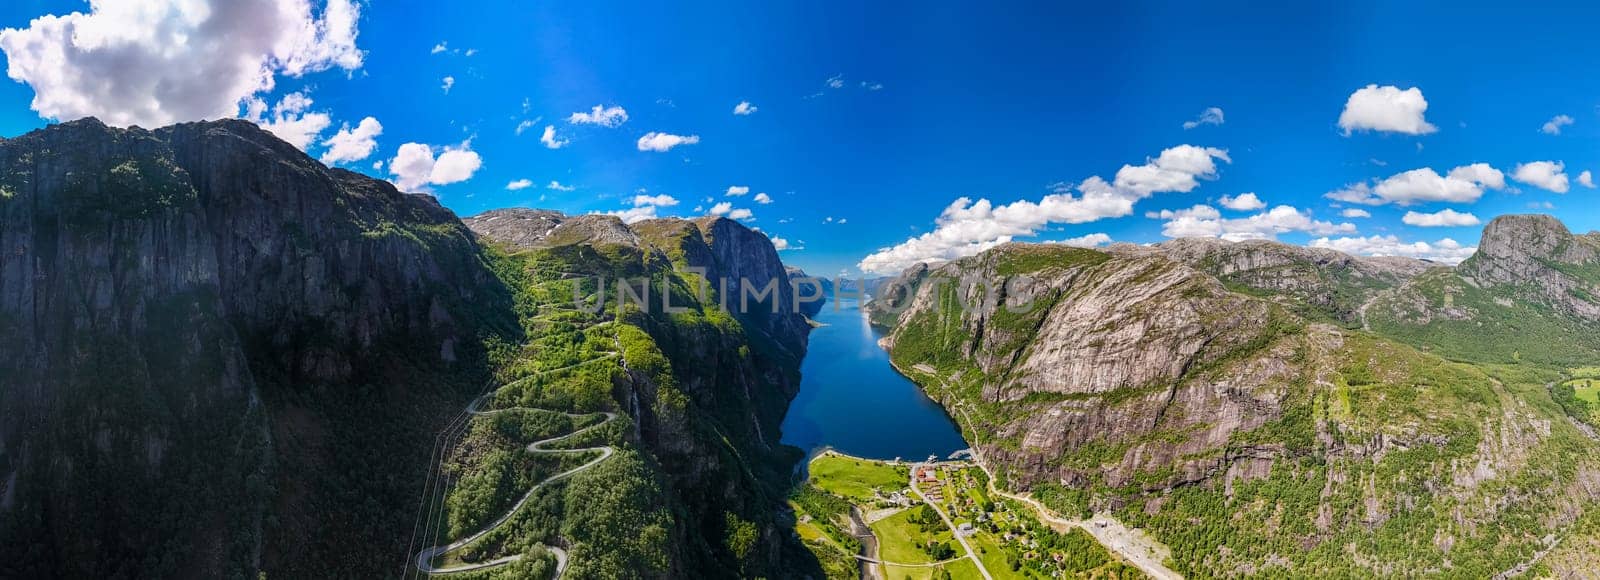 An aerial view of a winding road snaking through the towering mountains and lush greenery of a Norwegian fjord, with a clear blue sky and fluffy white clouds. Lysebotn, Lysefjorden, Norway